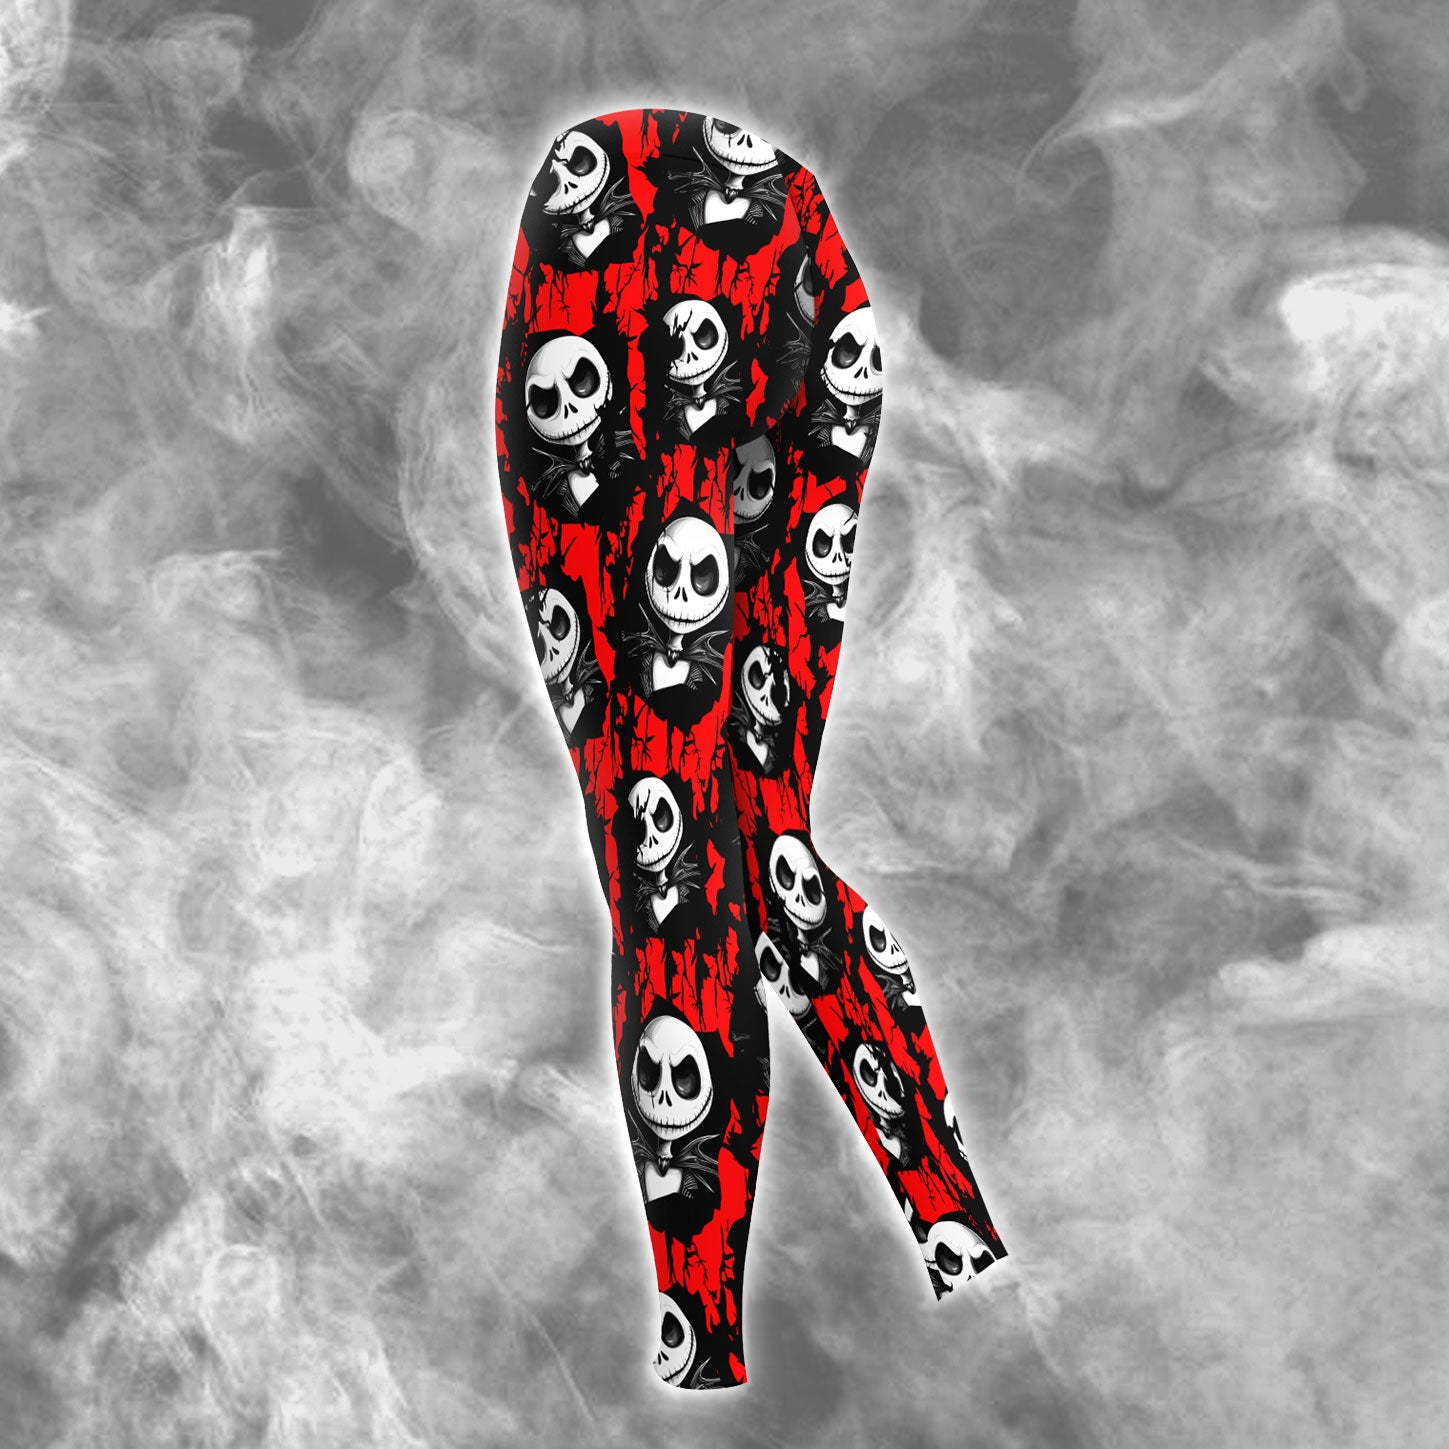 Red Nightmare Art Combo Hoodie and Leggings - Dark and edgy matching set with skull designs for a unique and stylish look